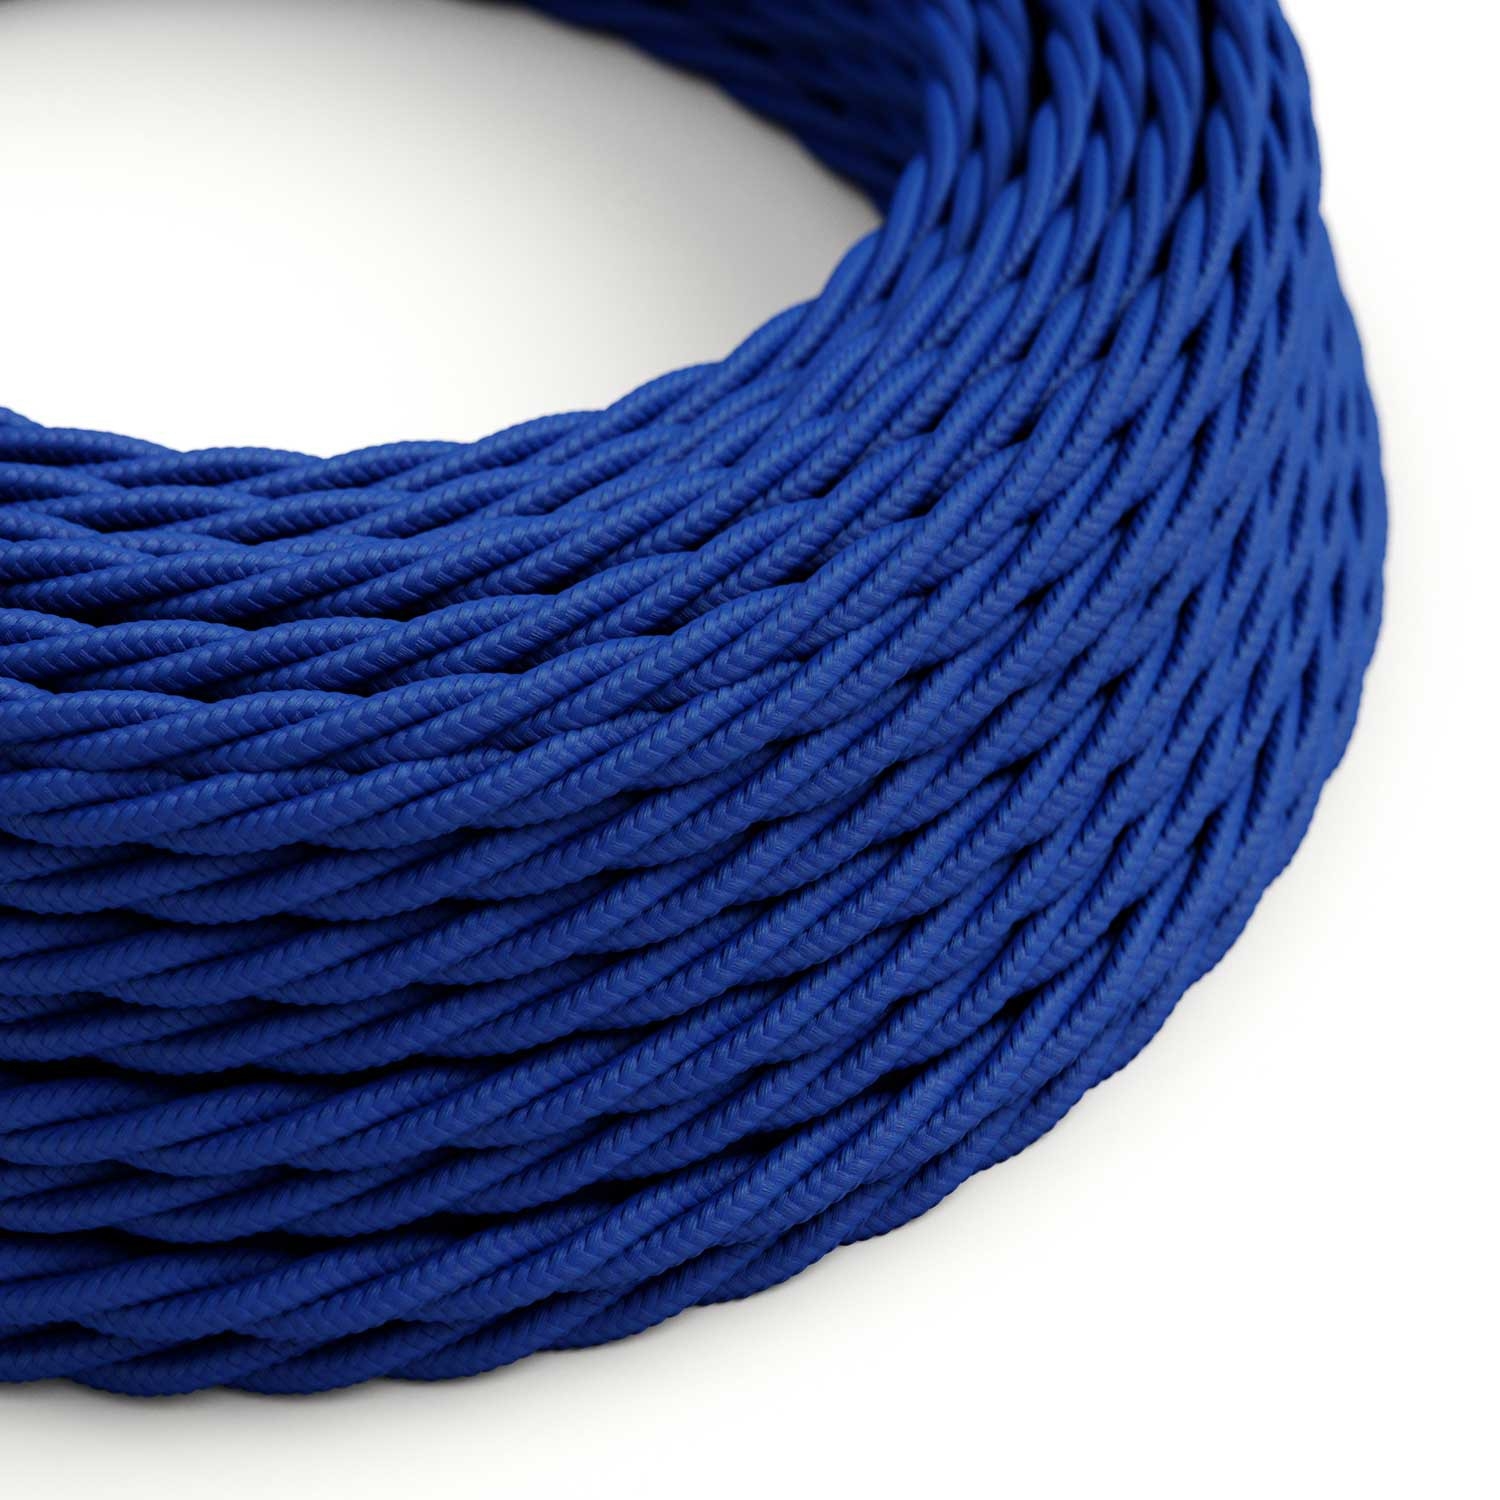 TM12 Blue Twisted Rayon Electrical Fabric Cloth Cord Cable